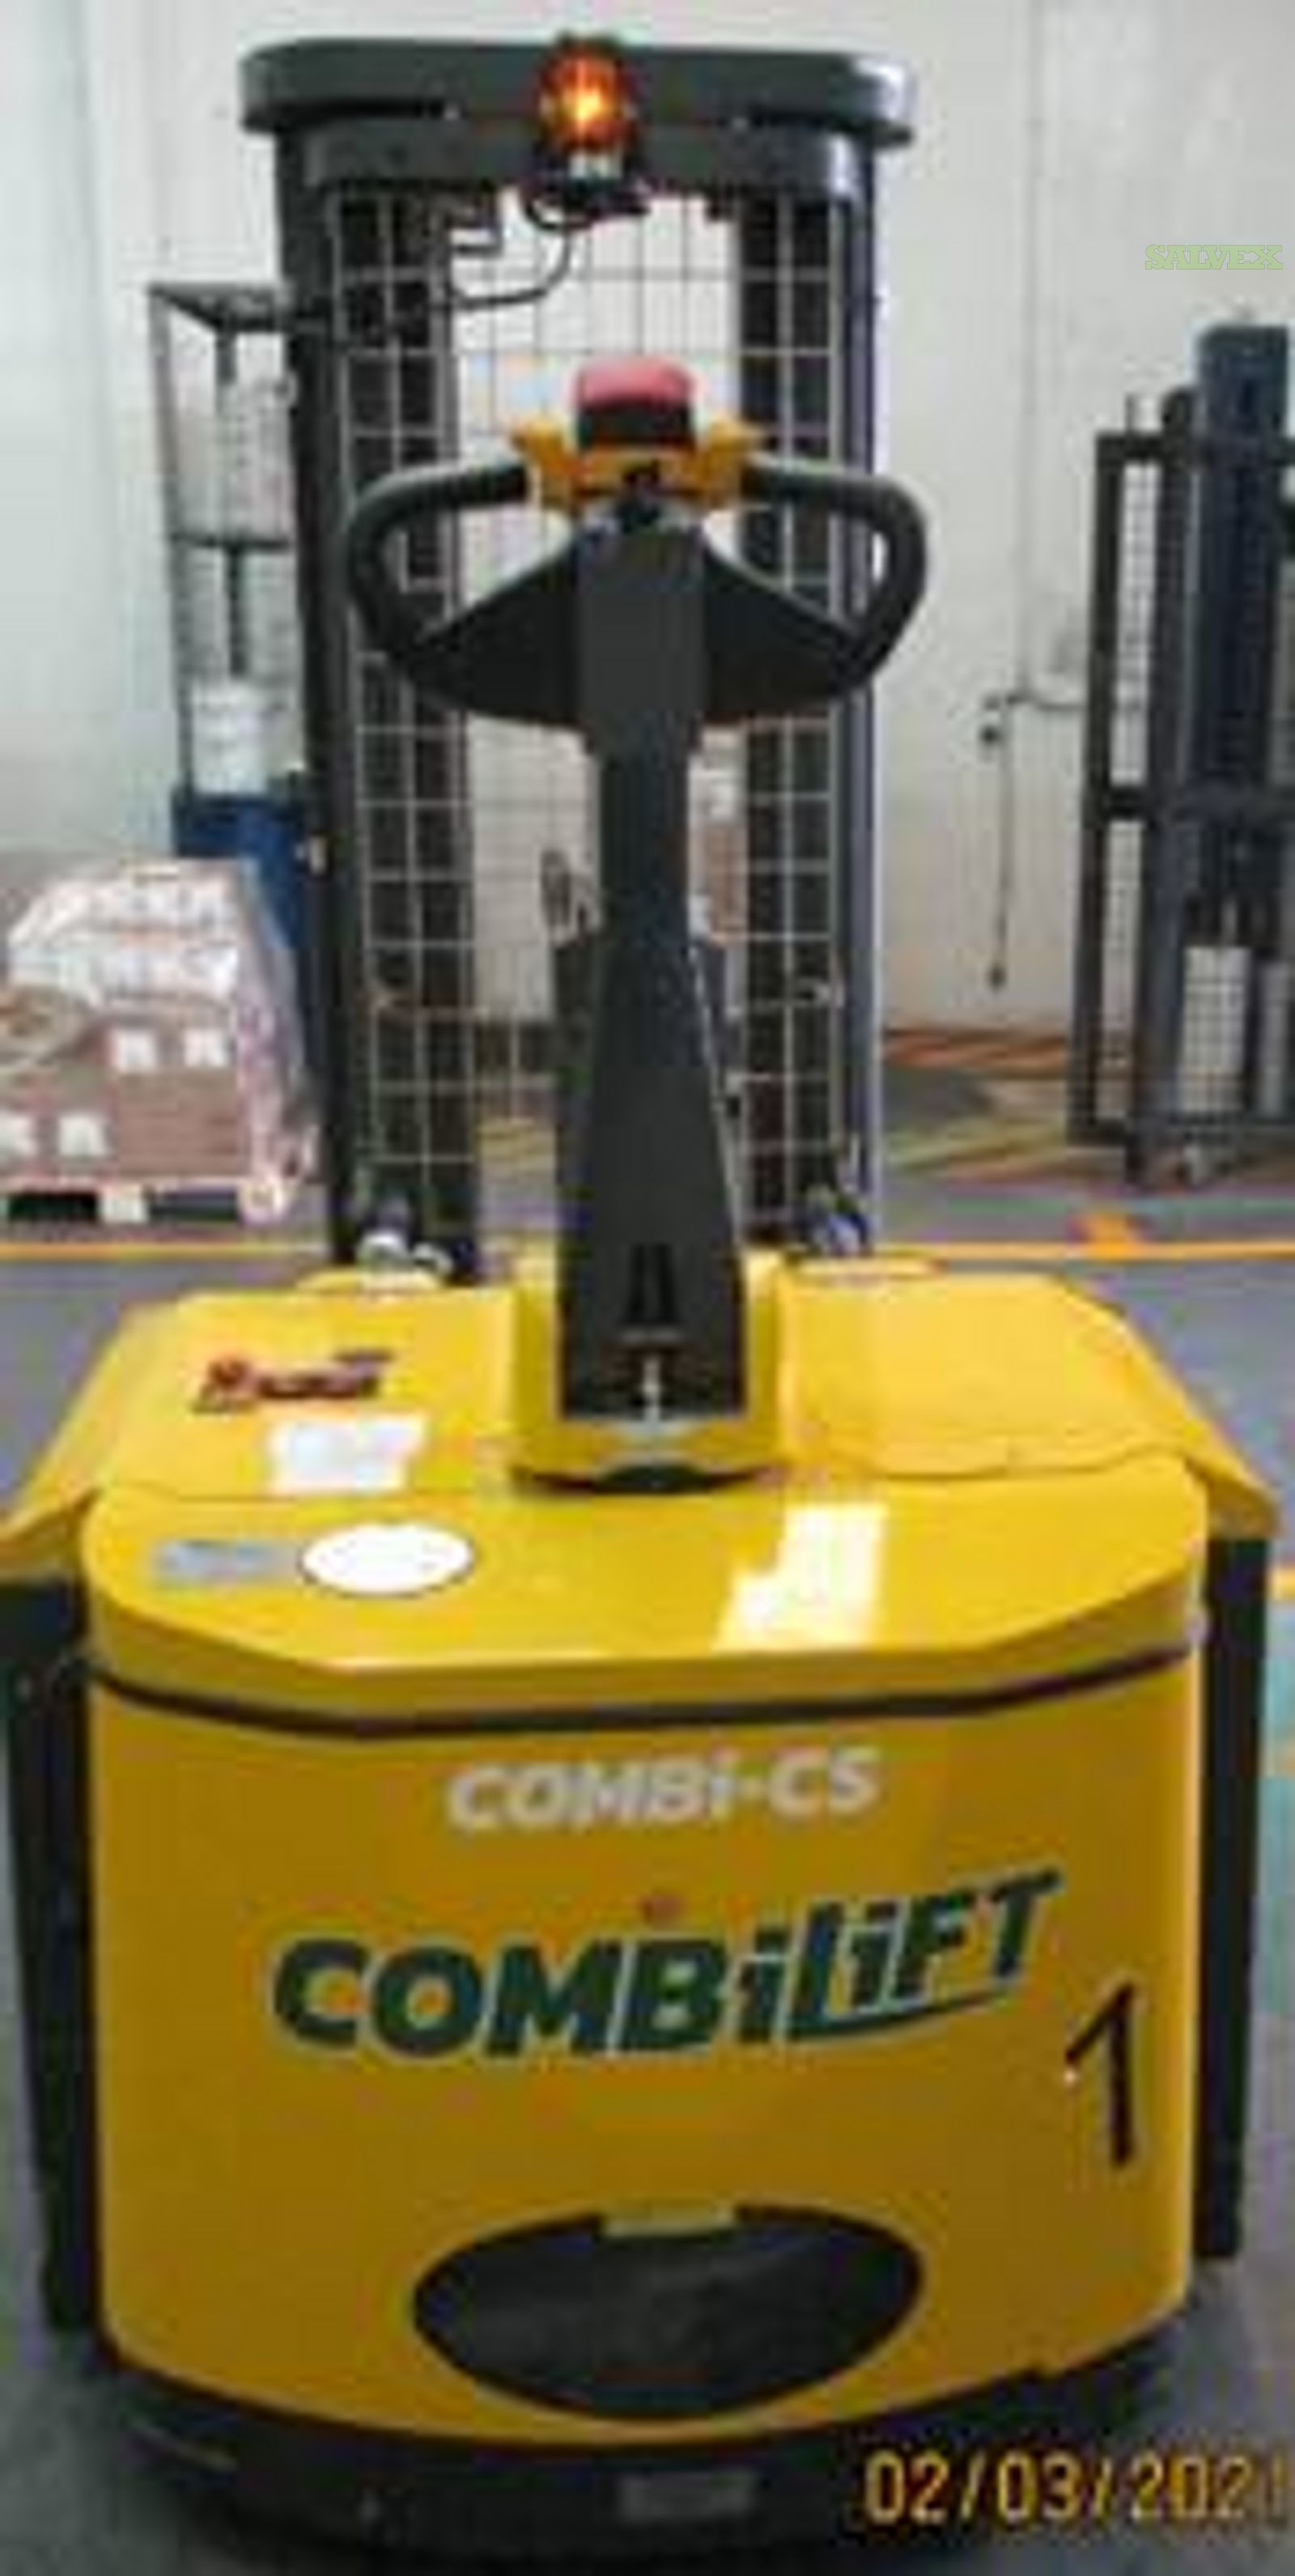 Combilift Combi-CS Electric Powered Stackers- Used (2 Units)